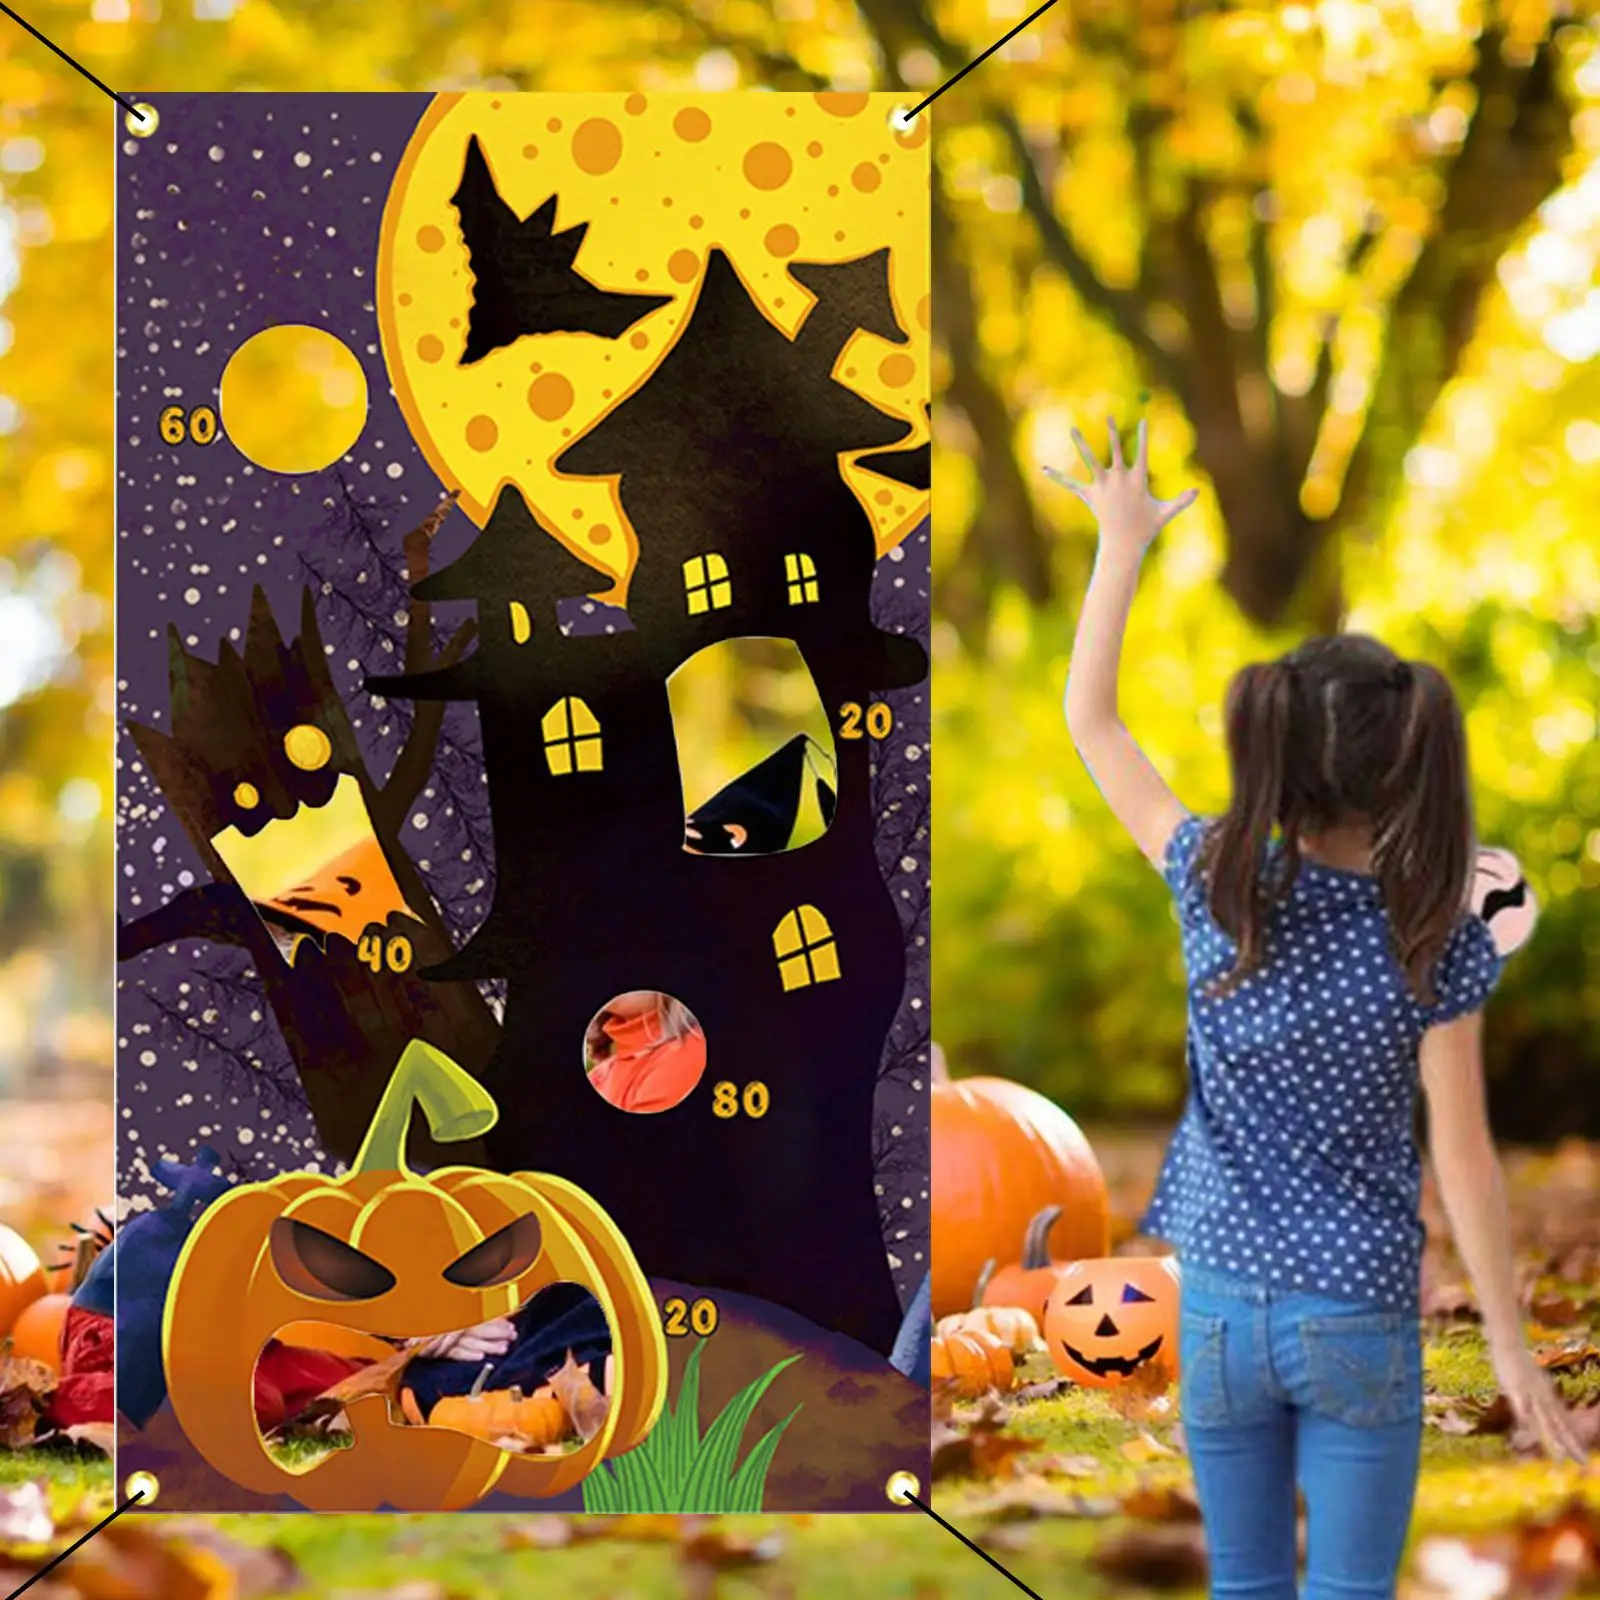 Halloween Themed Throwing Game Banner Kit for Adults Kids ,31.5x55Inches